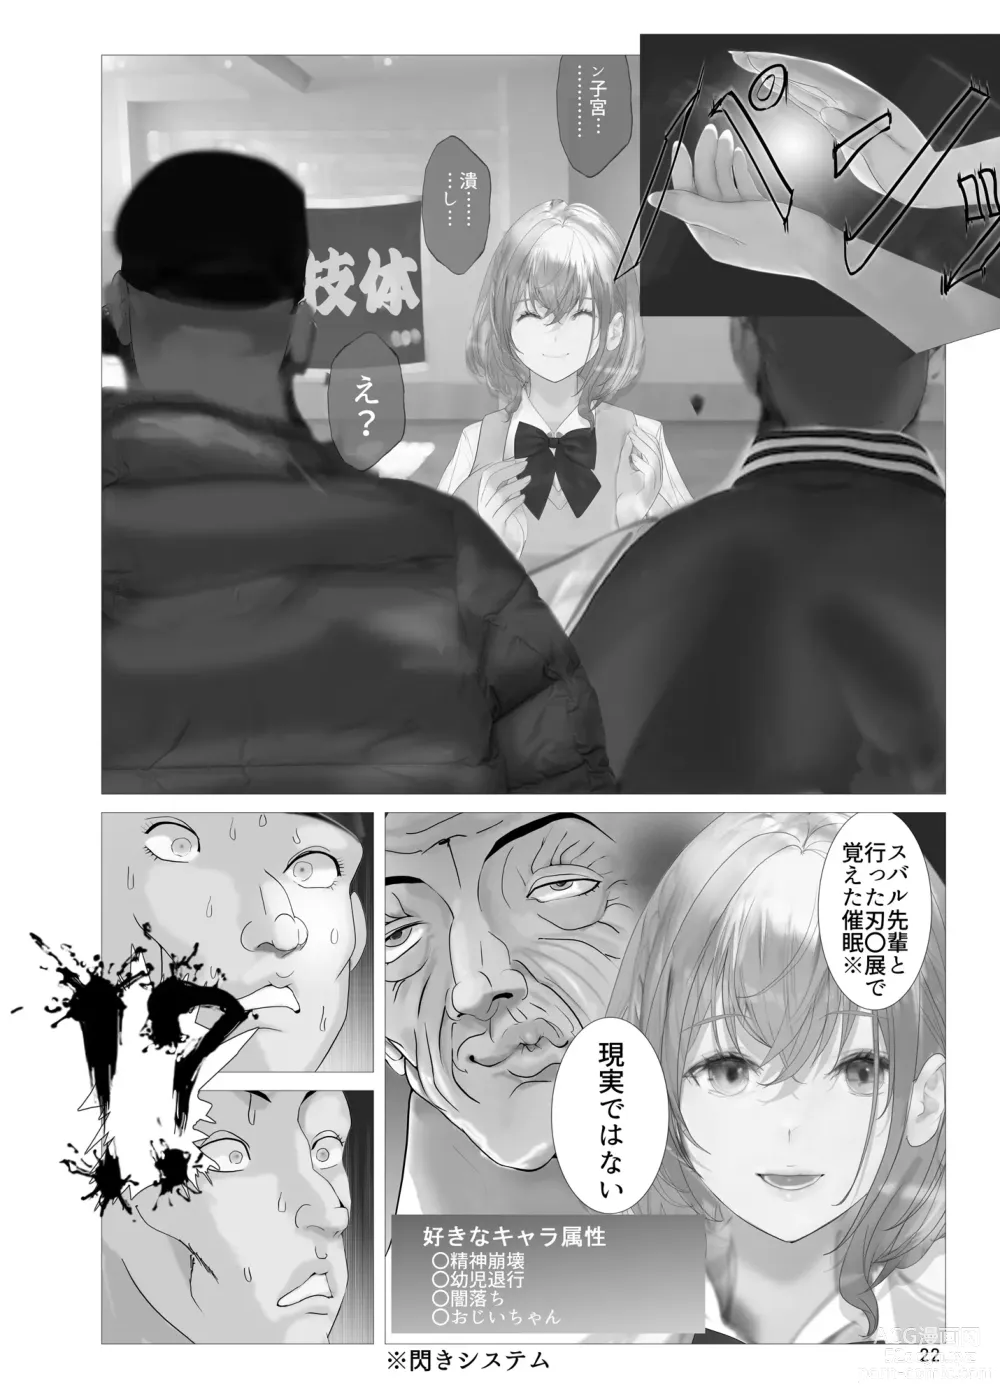 Page 21 of doujinshi NTR Noelf Lesson